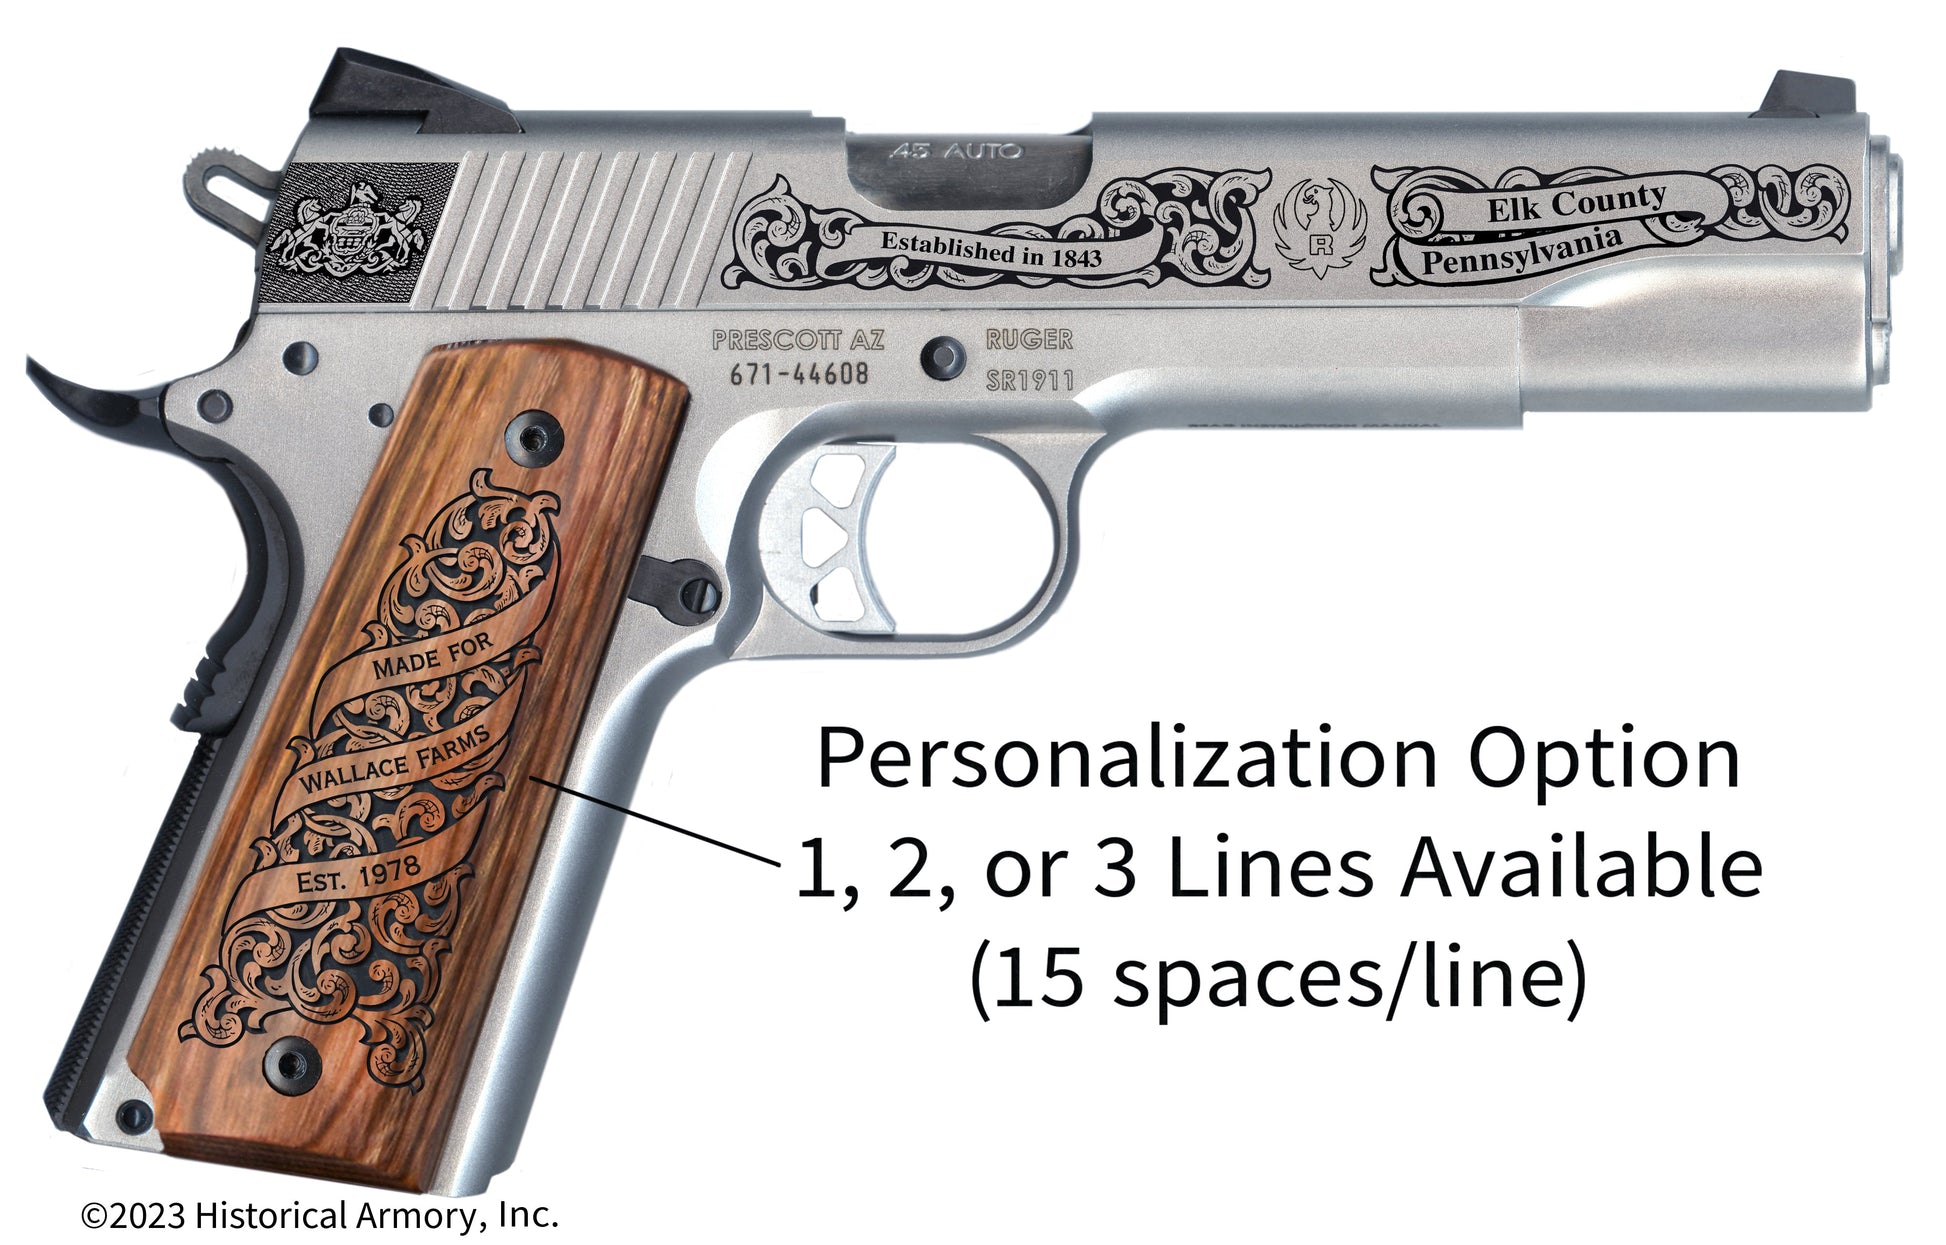 Elk County Pennsylvania Personalized Engraved .45 Auto Ruger 1911